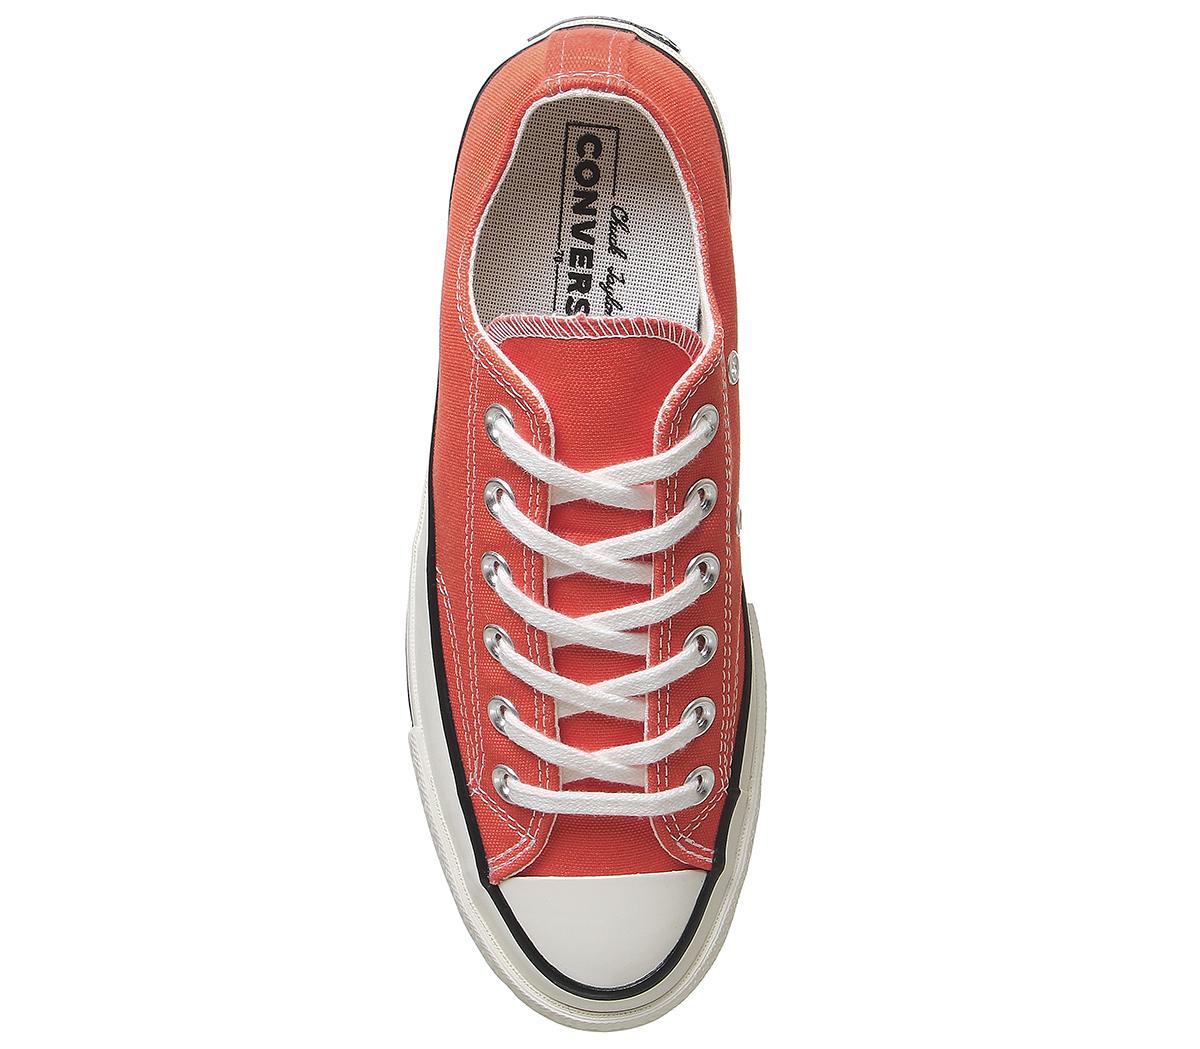 Converse All Star Ox 70s Trainers Vermillion Red Egret Black - Women's ...